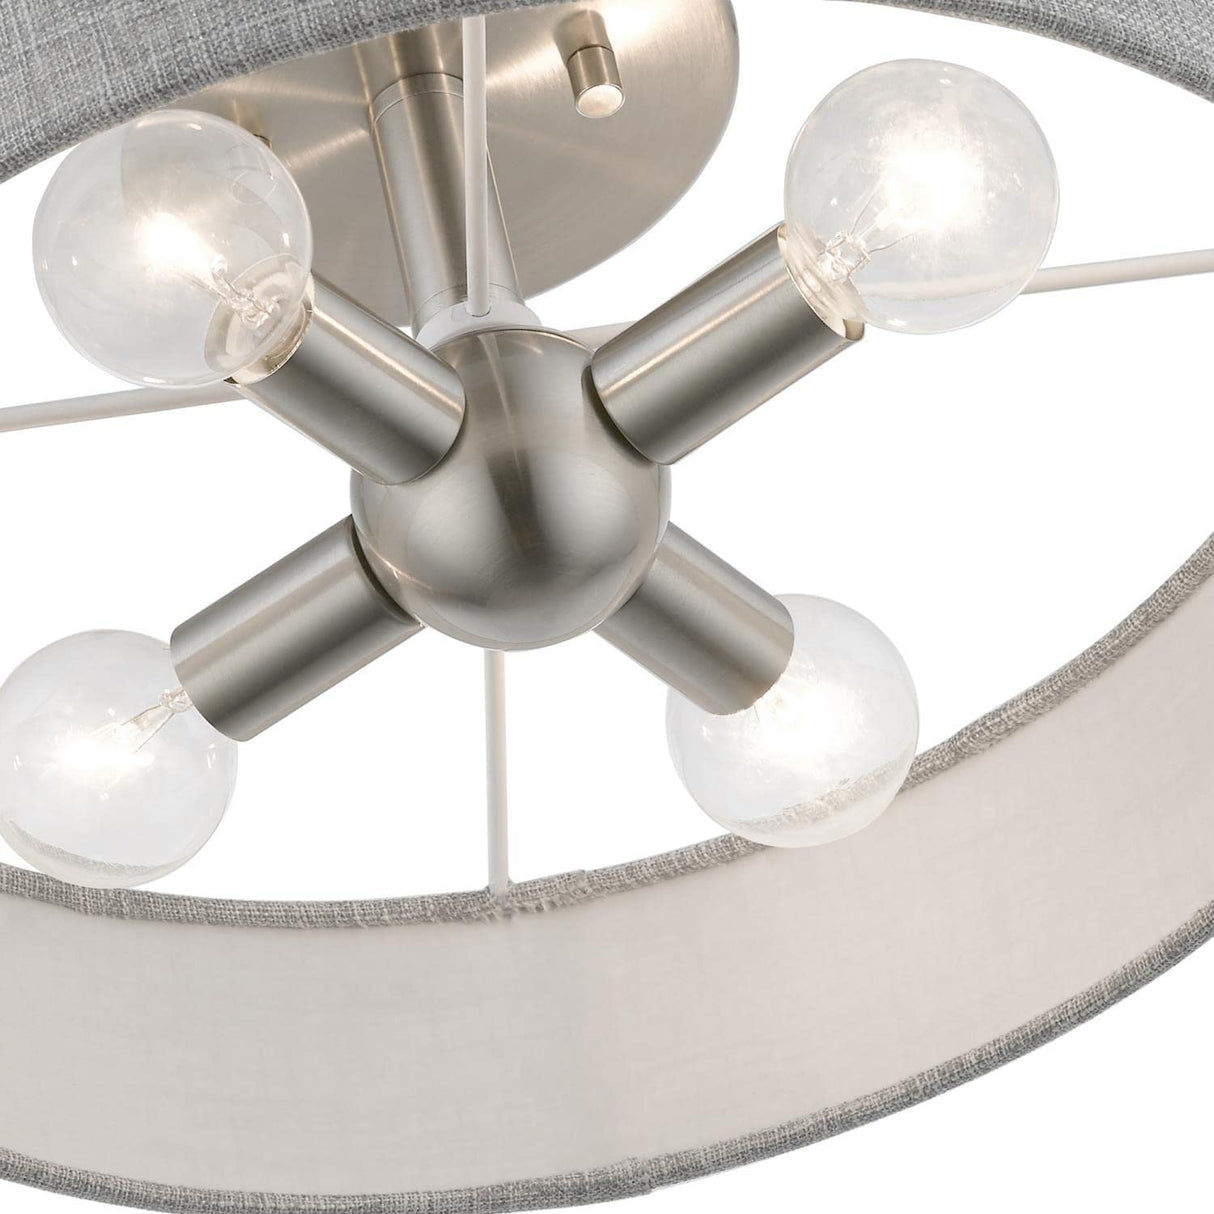 Livex Lighting 46147-91 Elmhurst - 4 Light Semi-Flush Mount In Timeless Style-6 Inches Tall and 14 Inches Wide, Elmhurst - 4 Light Semi-Flush Mount In Timeless Style-6 Inches Tall and 14 Inches Wide